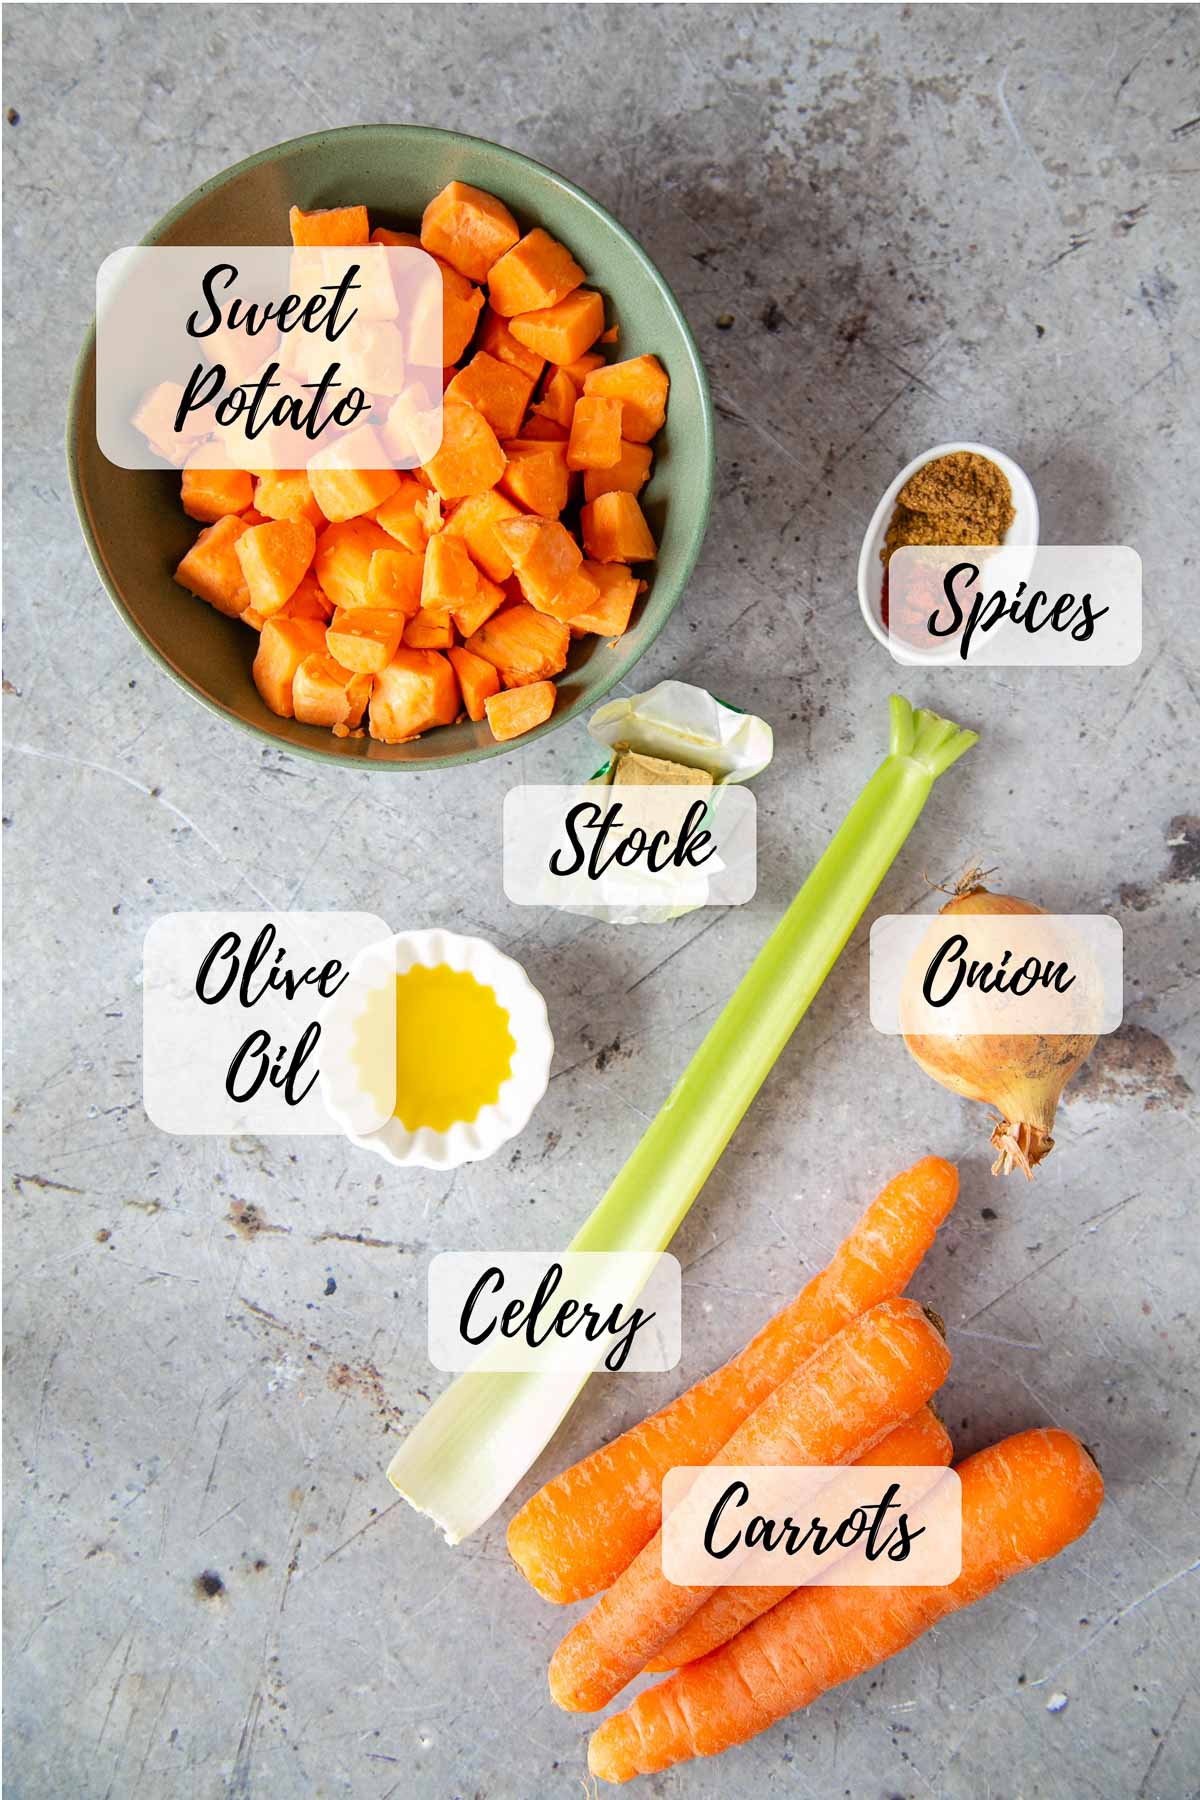 Annotated ingredients needed for making the soup - sweet potatoes, spices, stock cube, olive oil, onion, celery and carrots